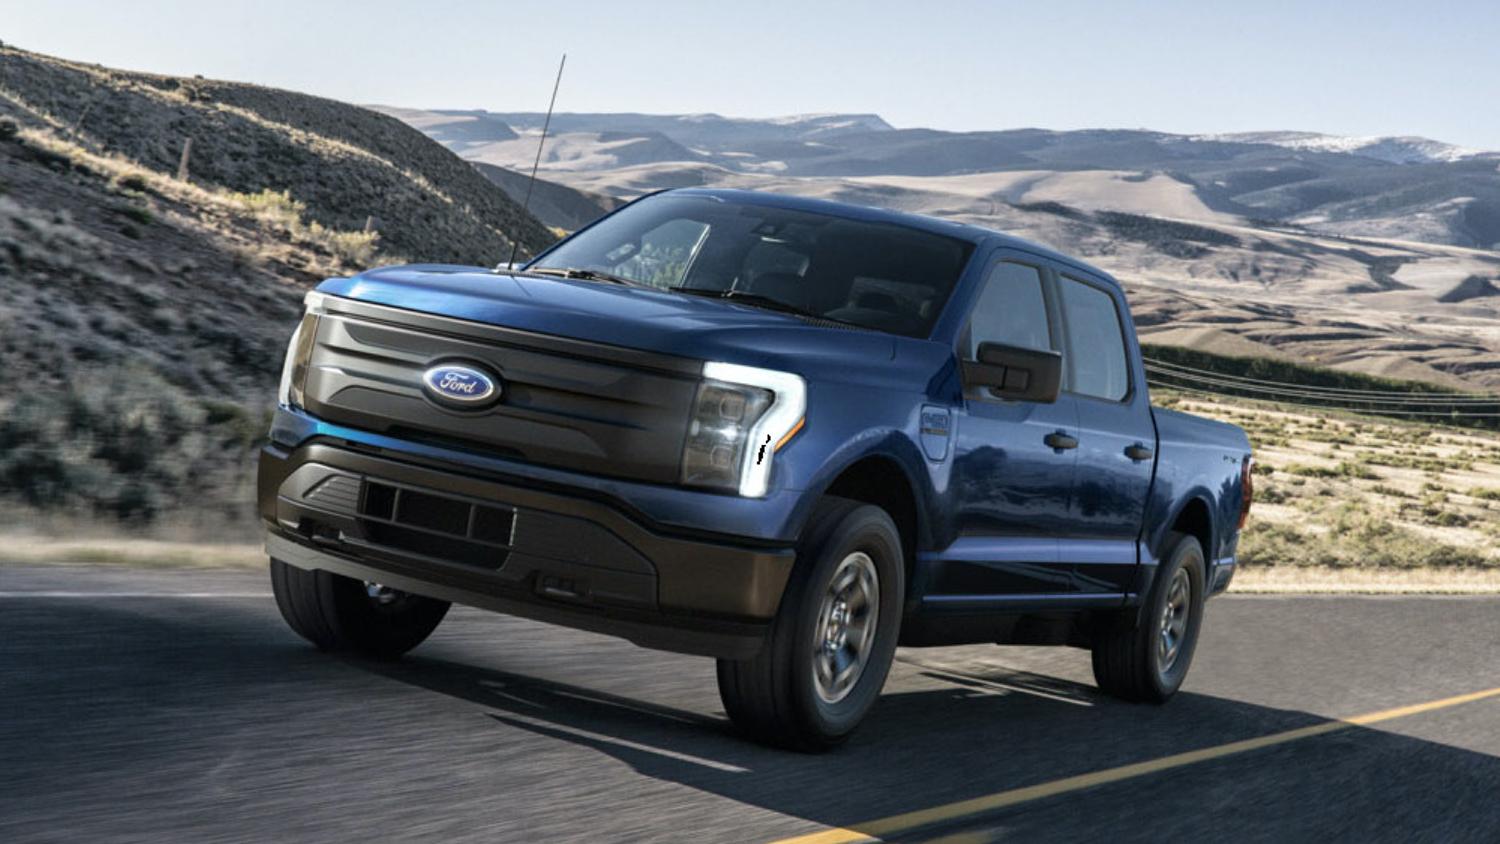 Ford F-150 Lightning ⚡️Complete Photo + Wallpaper Archive for the New F-150 Lightning⚡️ B29CCD95-26B1-443F-B611-DF9E6C1651E9